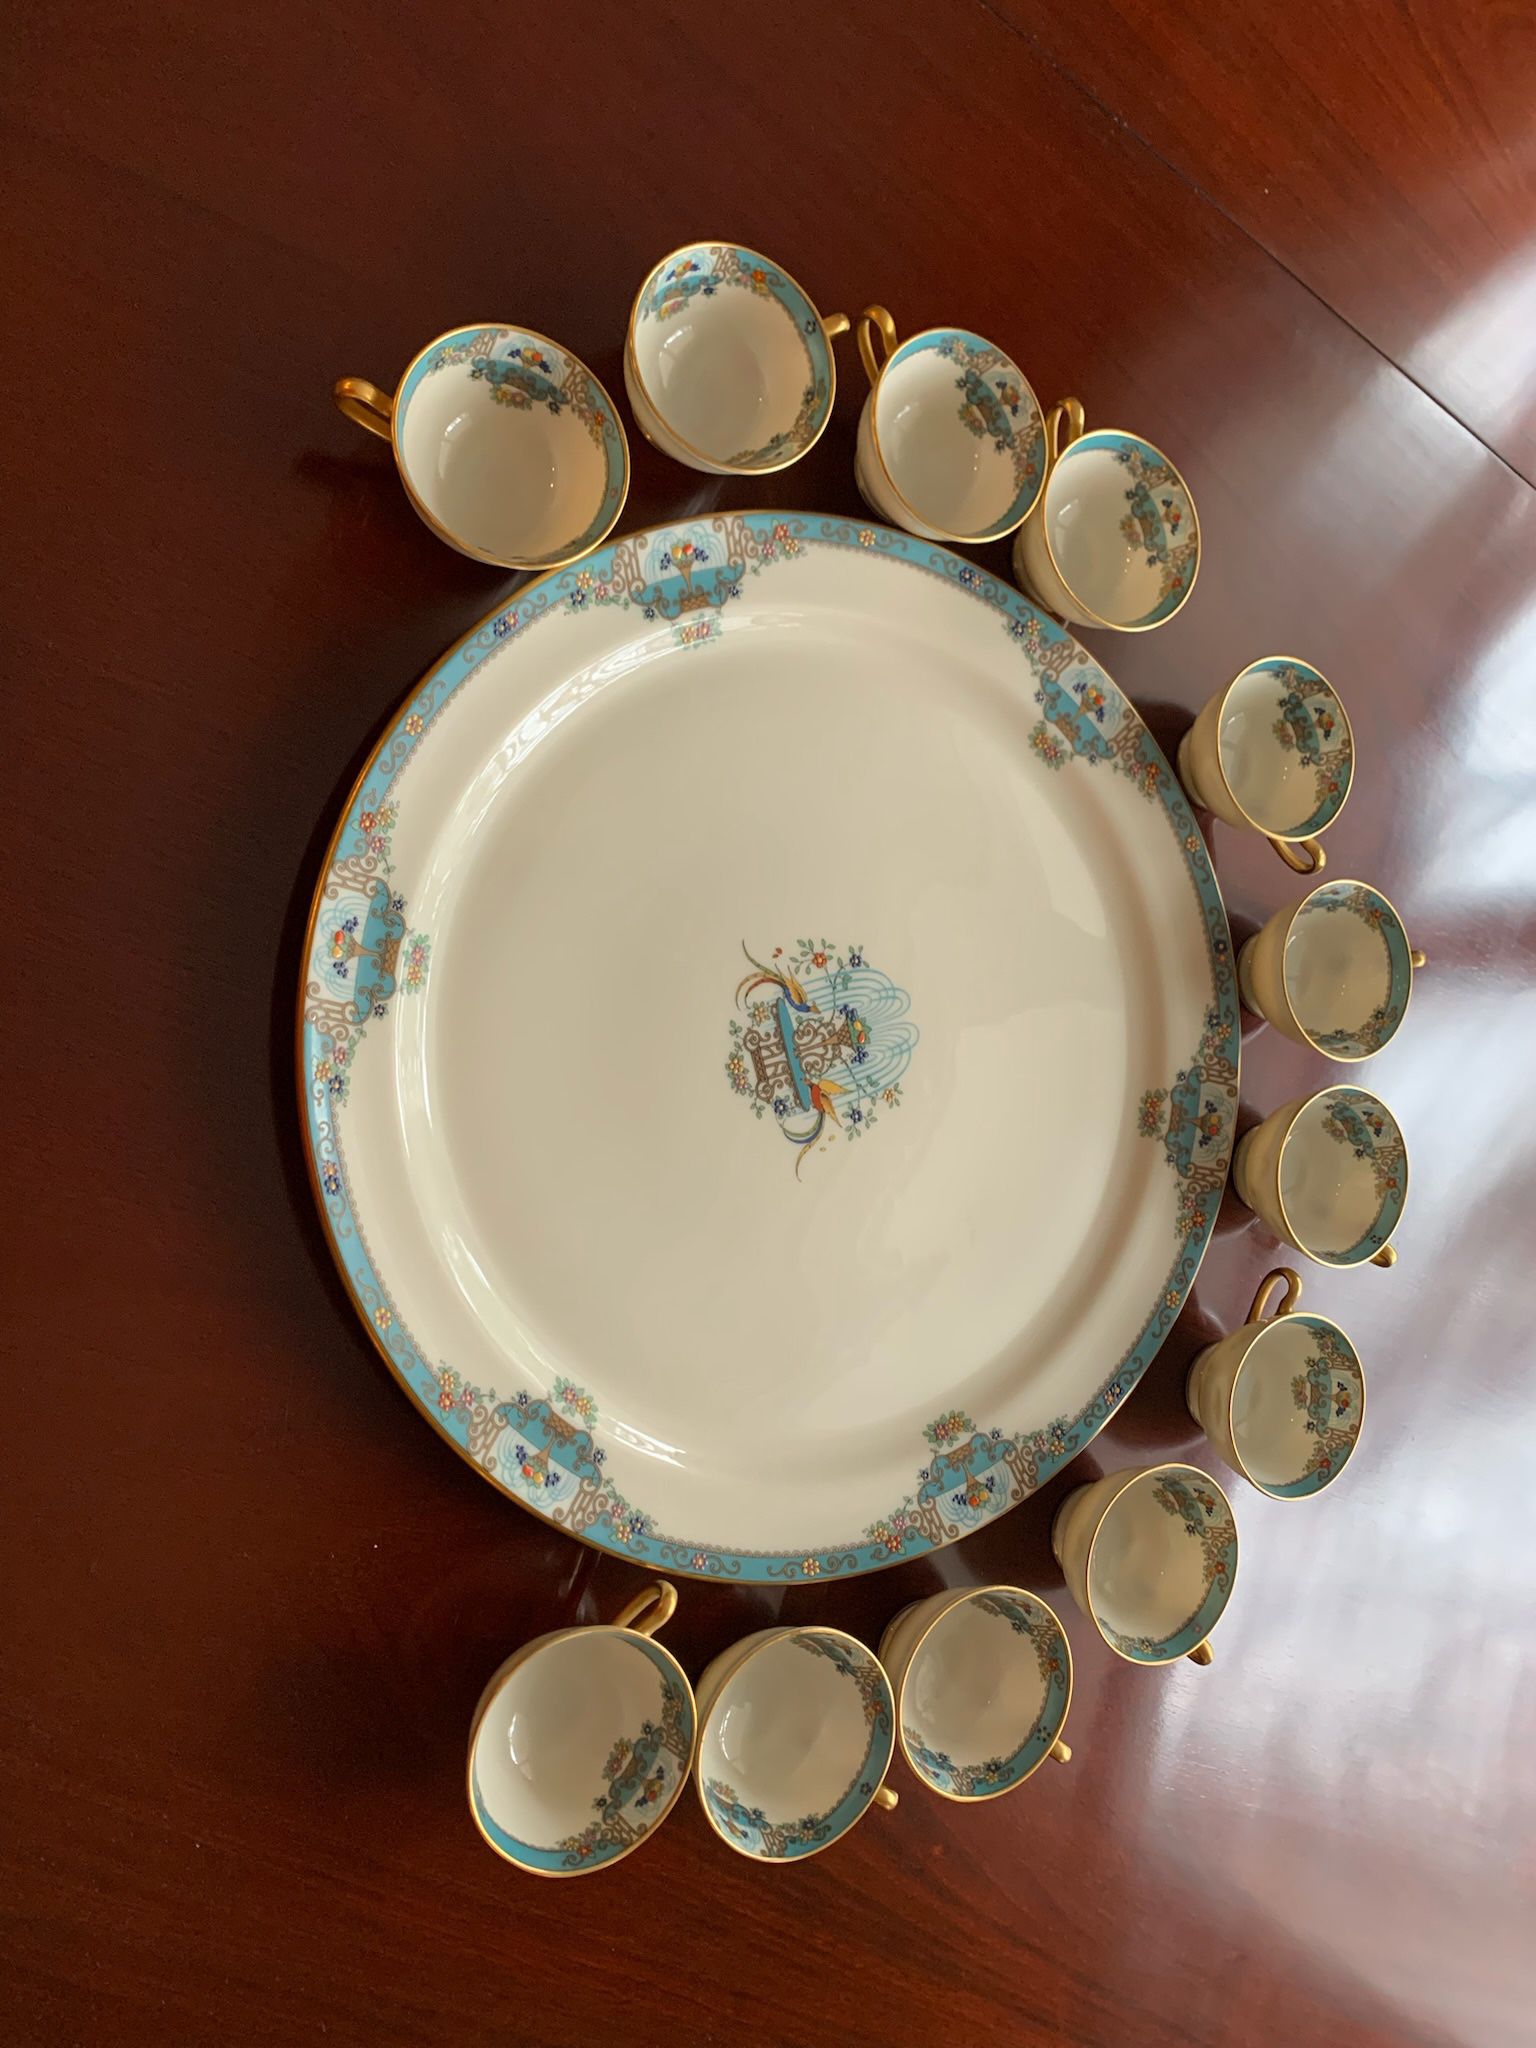 Lenox, Fountain Design, Platter with 12 matching Tea Cups. Like new condition. 